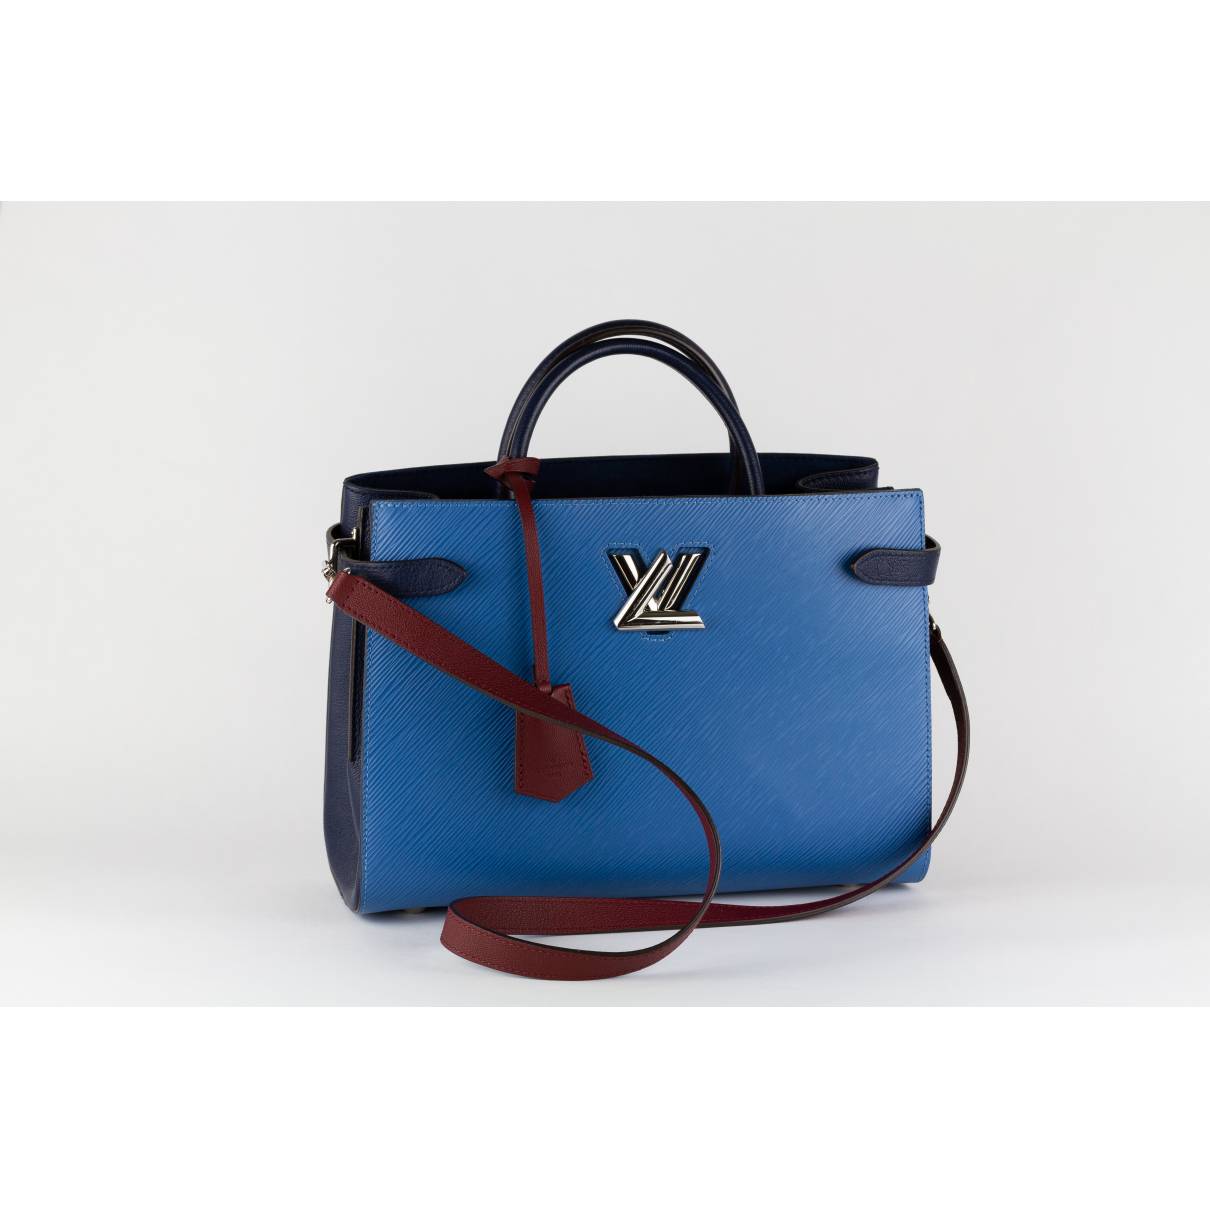 Louis Vuitton - Authenticated Twist Handbag - Leather Blue for Women, Very Good Condition